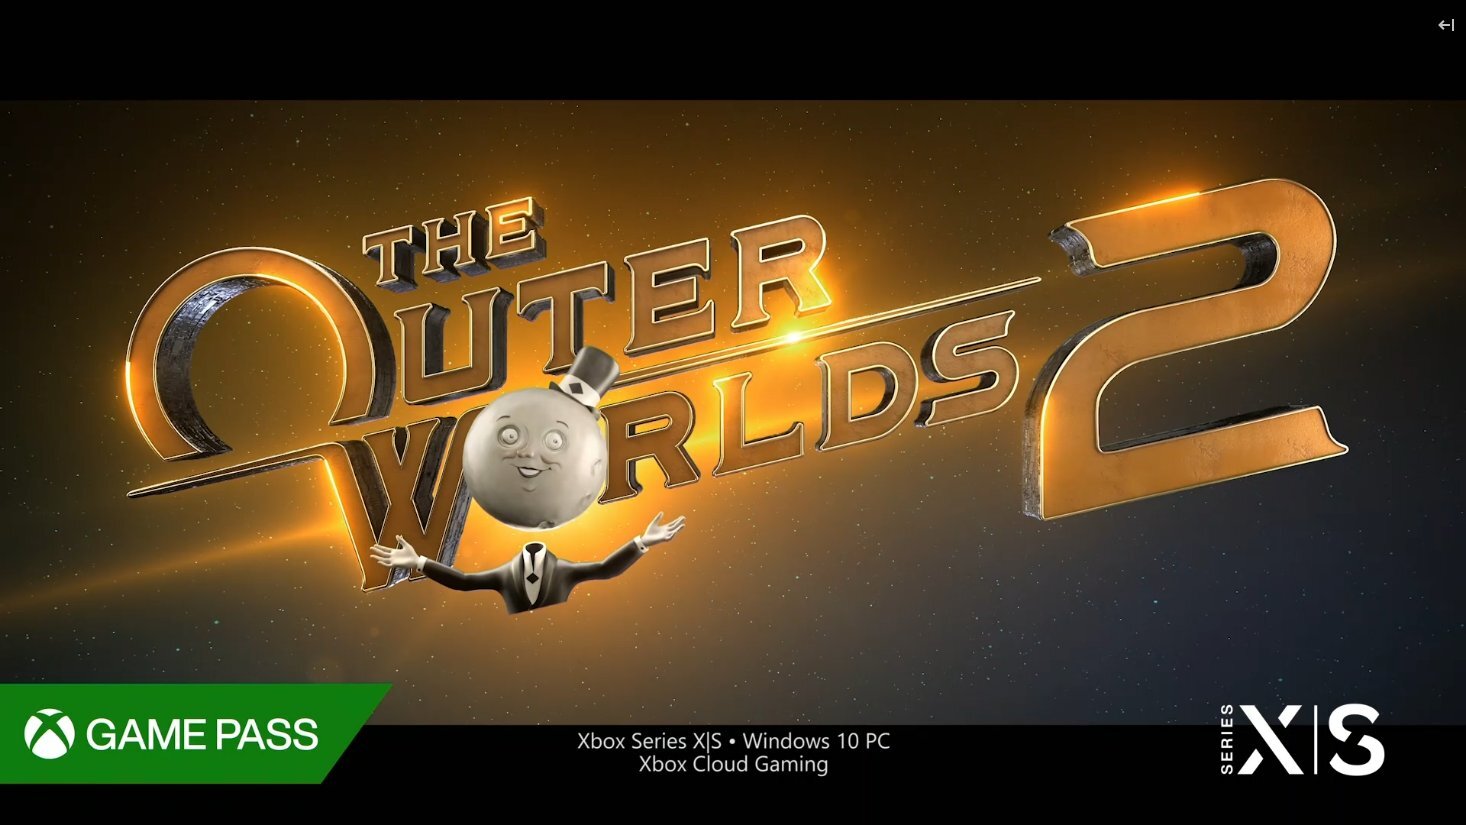 E3 2021: Πρώτη ματιά στα Starfield και The Outer Worlds 2 